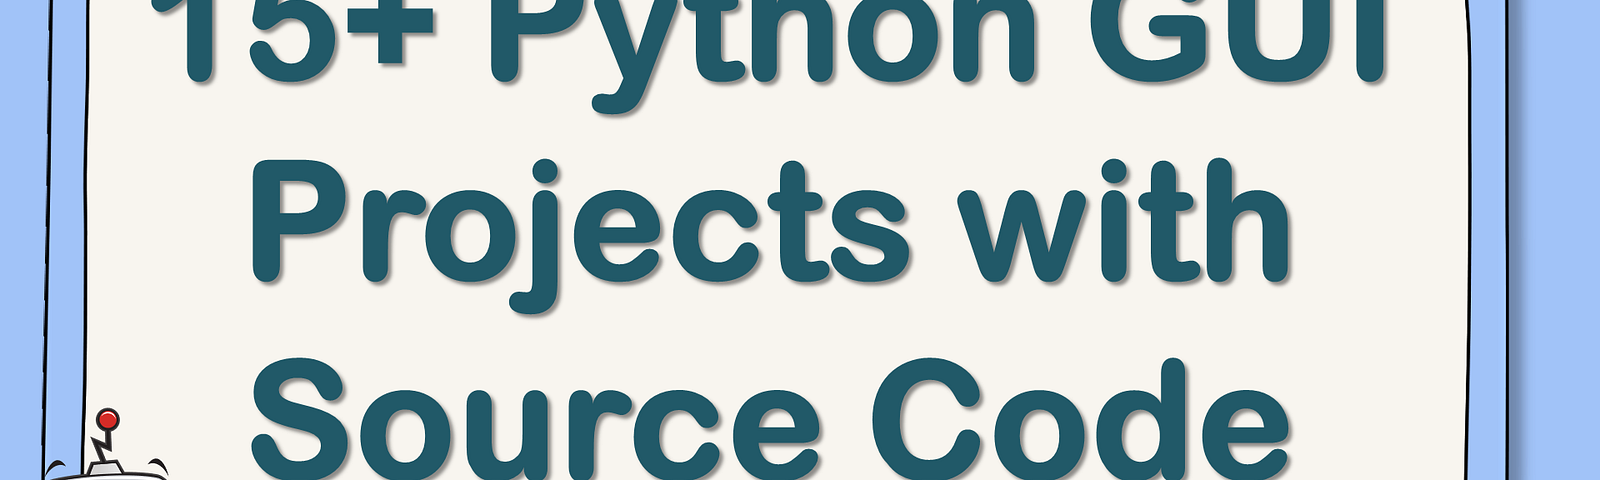 60 Python Projects with Source Code, by Aman Kharwal, Coders Camp